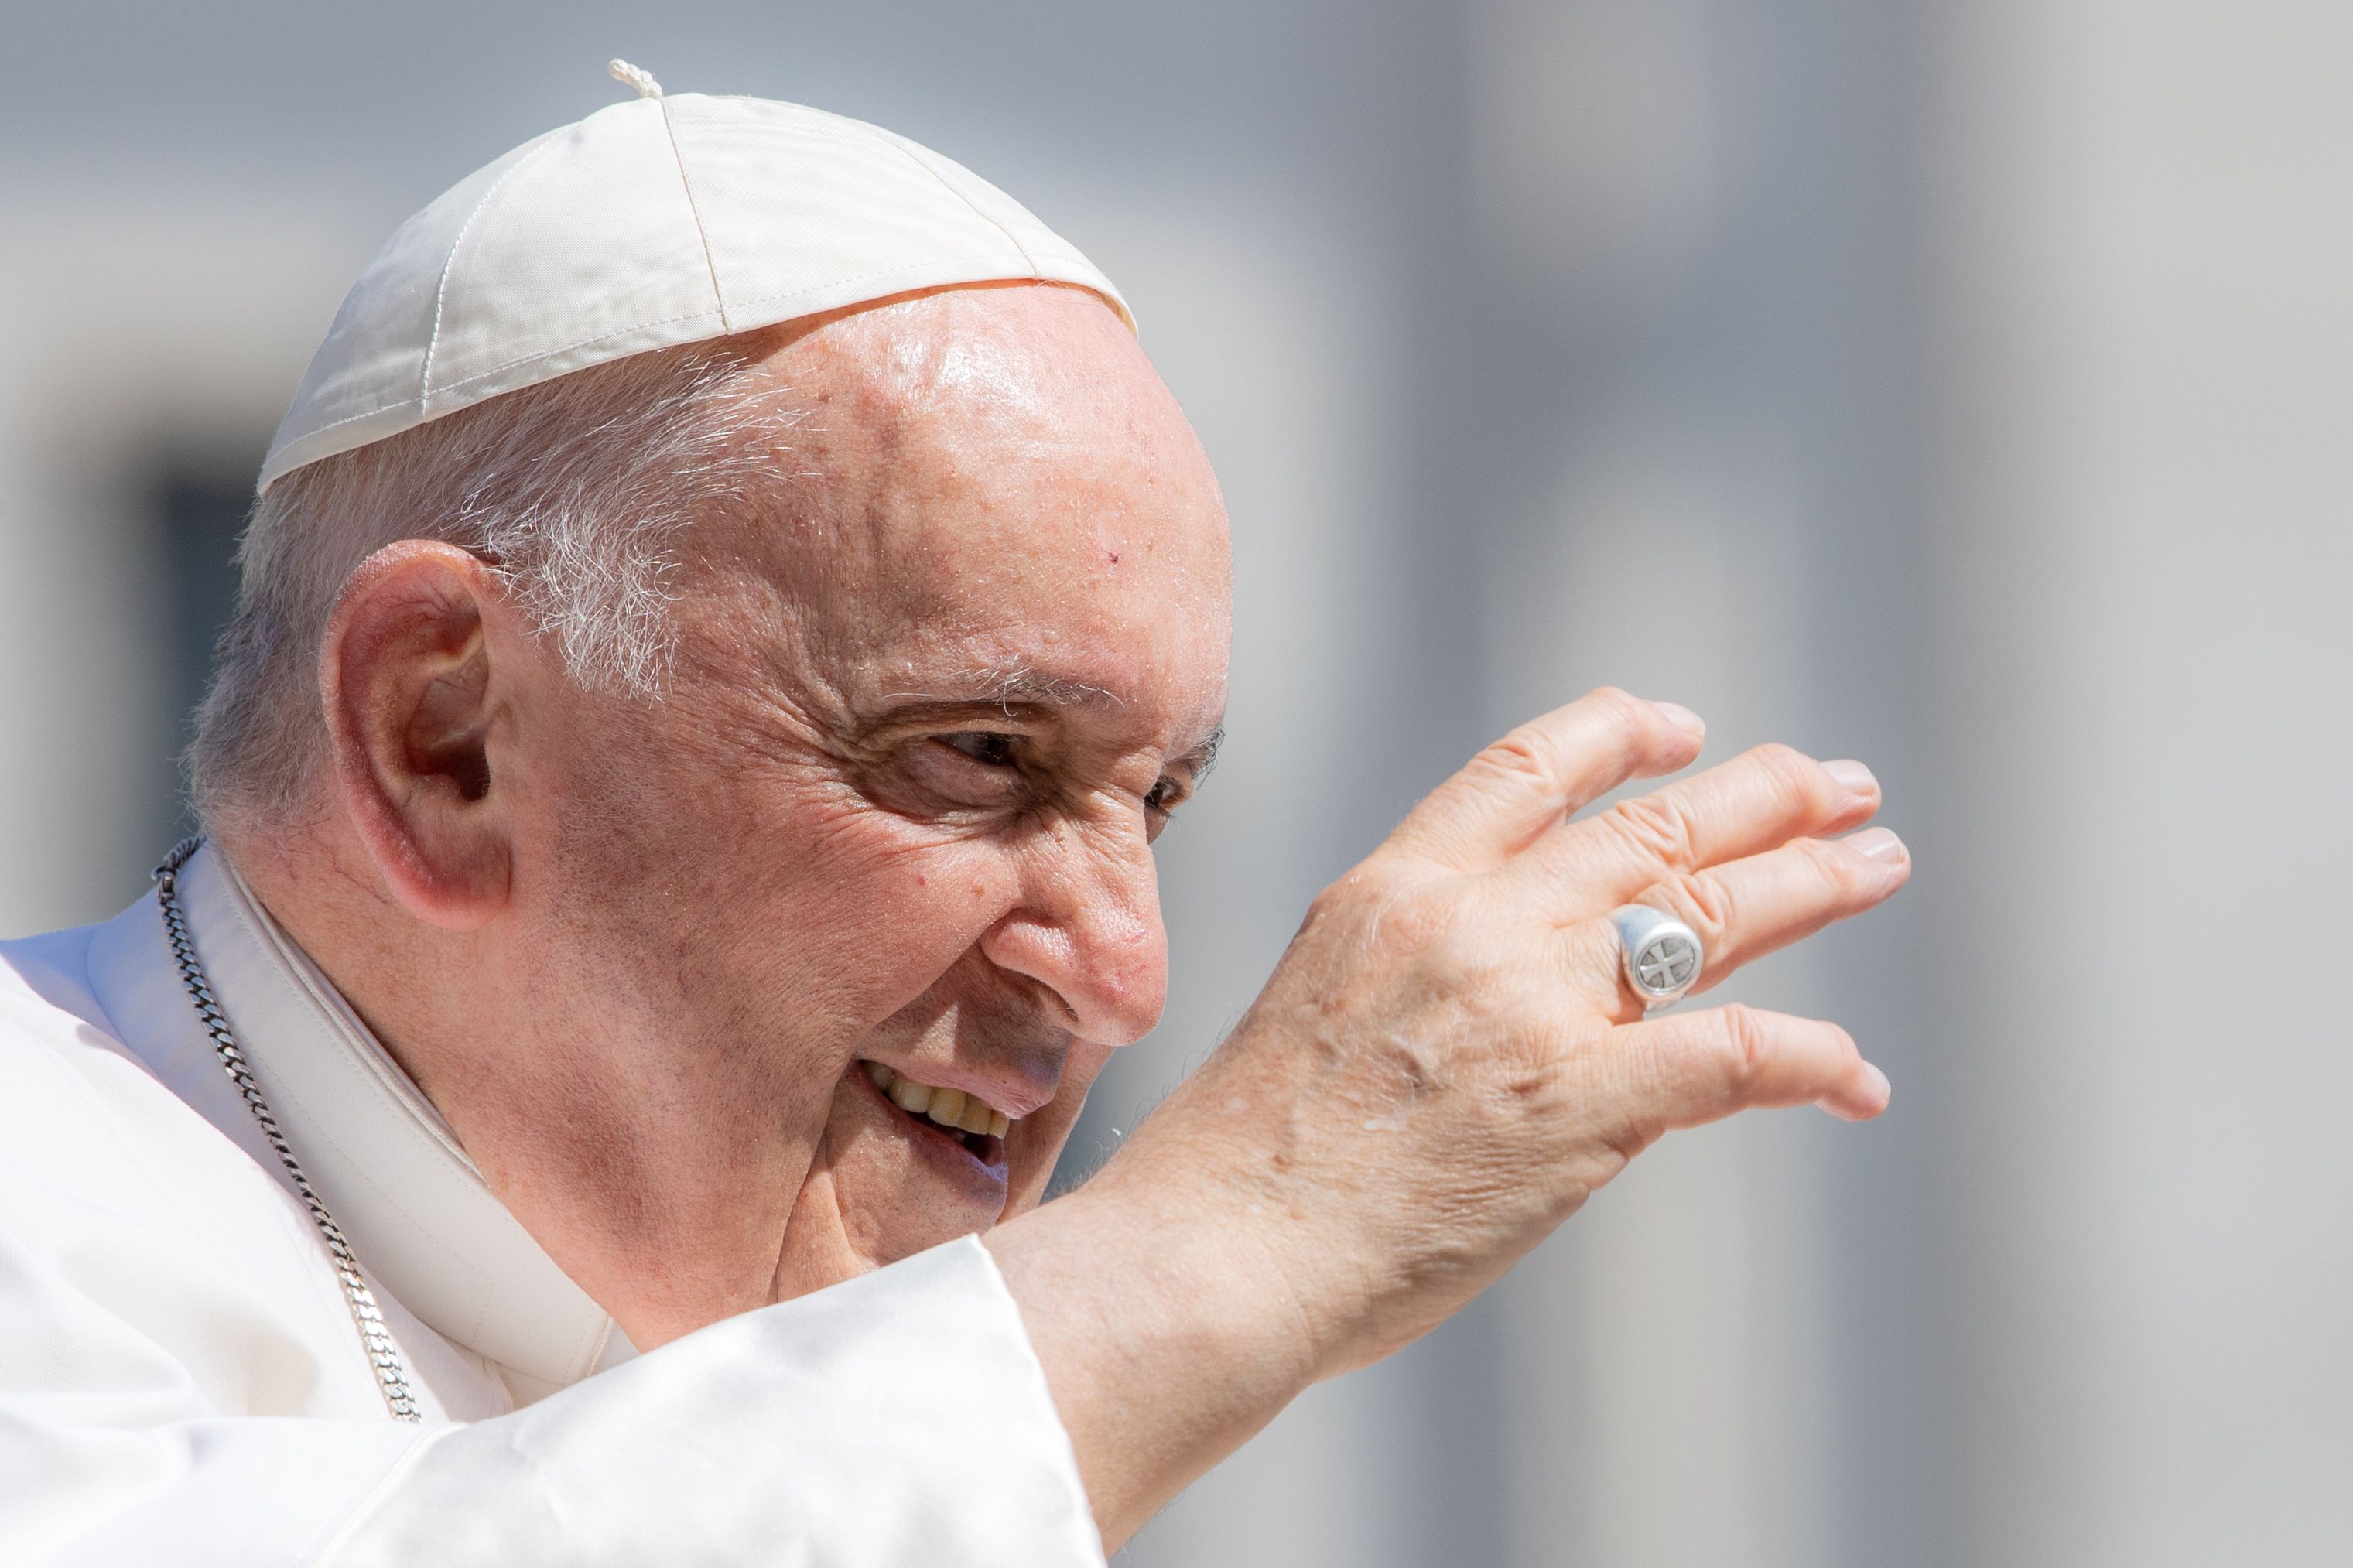 Pope Francis’ appointments canceled until June 18, Italian diocese says